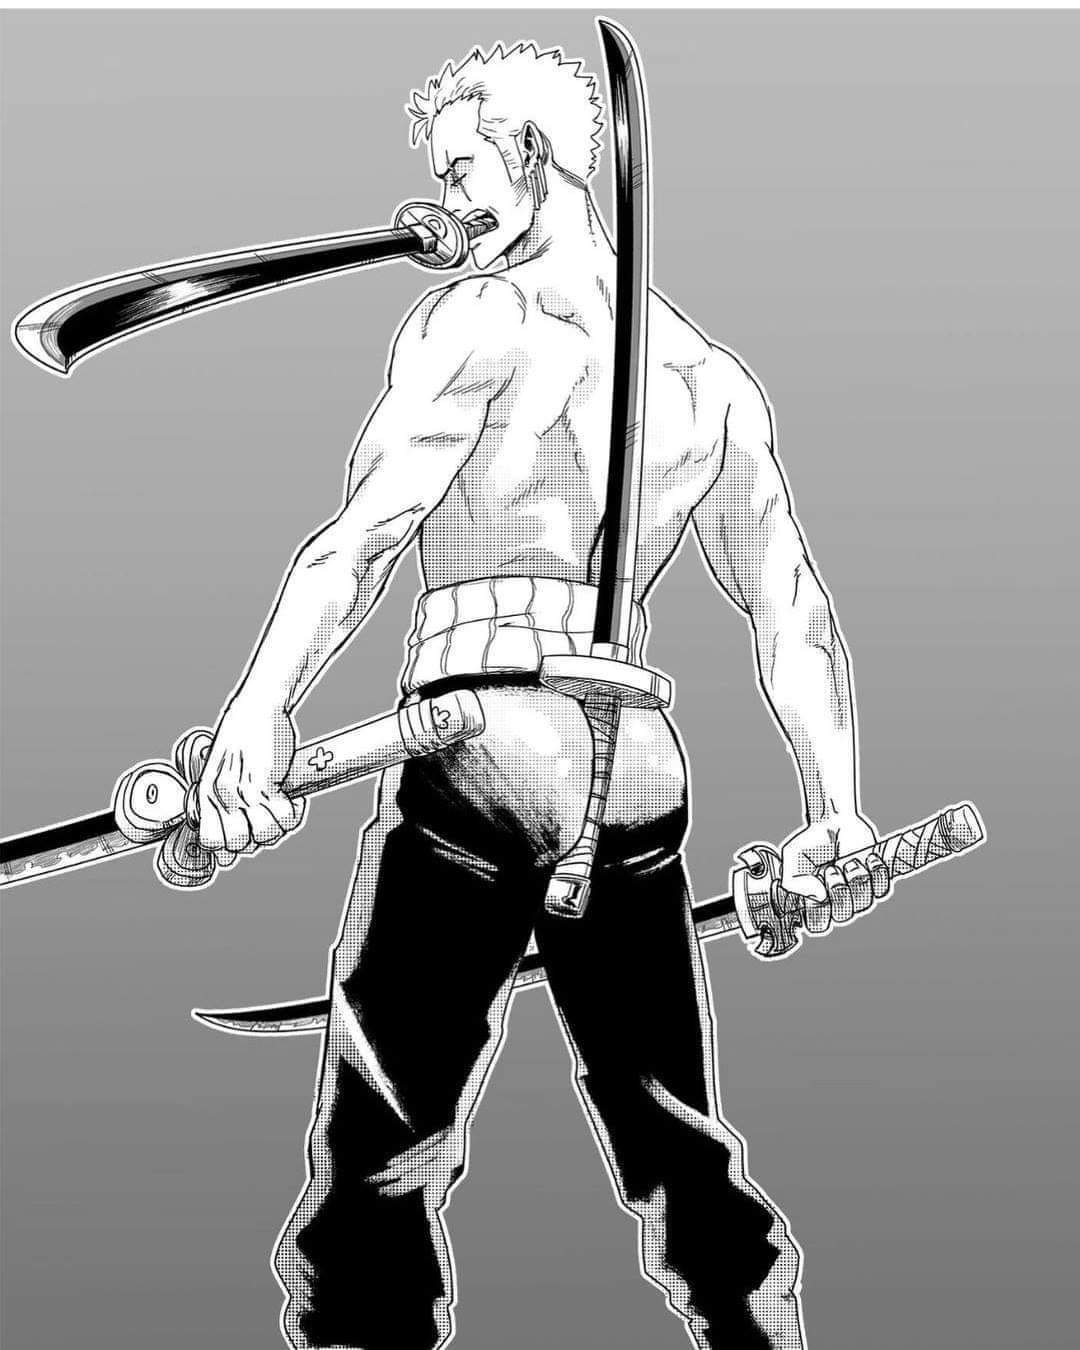 No "Zoro 4 Sword Style" memes have been featured yet. 